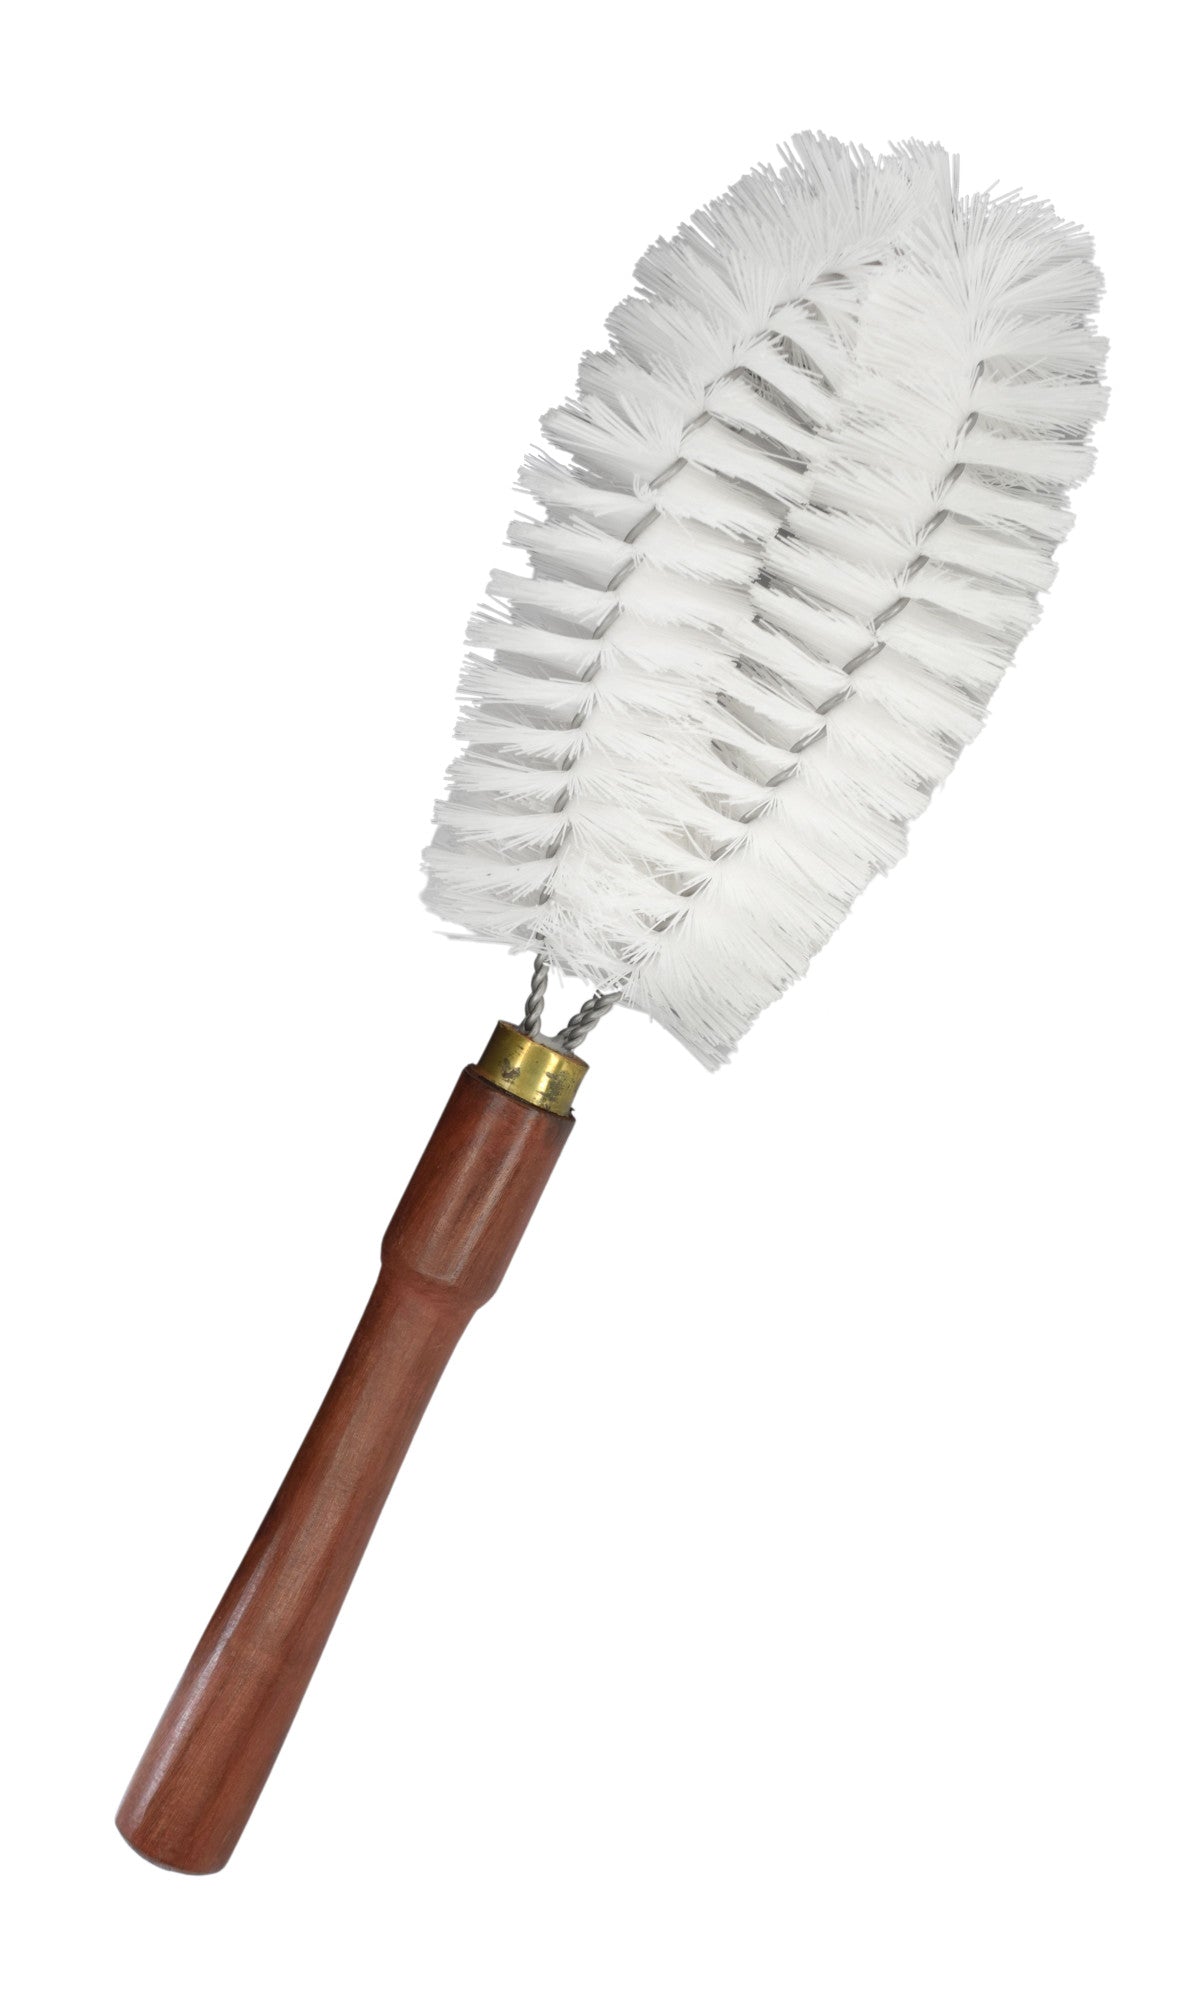 Bristle Cleaning Brushes with Fan-Shaped Ends, 11.25, Stainless